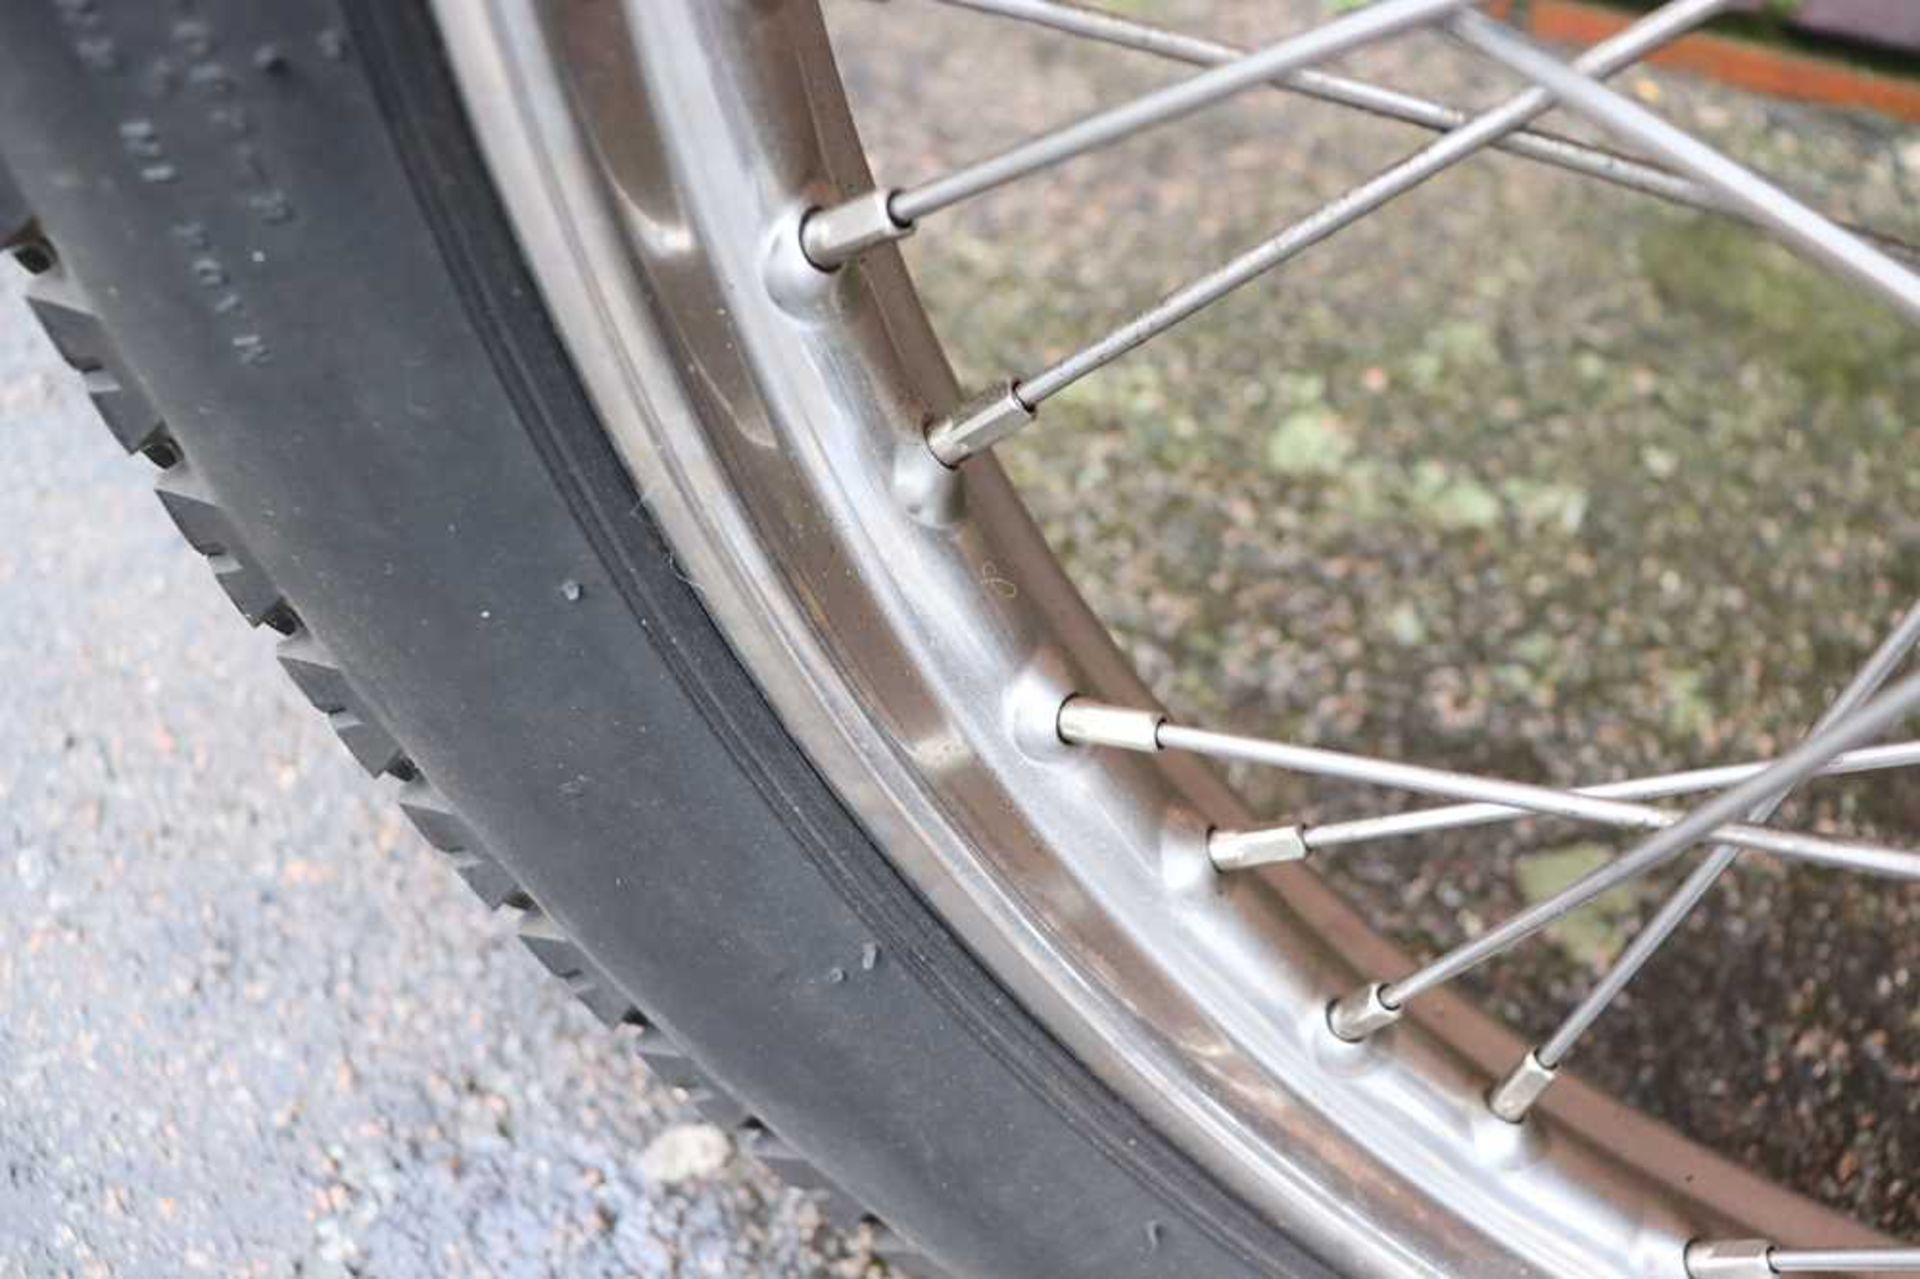 1956 BSA C12 Stainless steel rims and spokes - Image 31 of 44